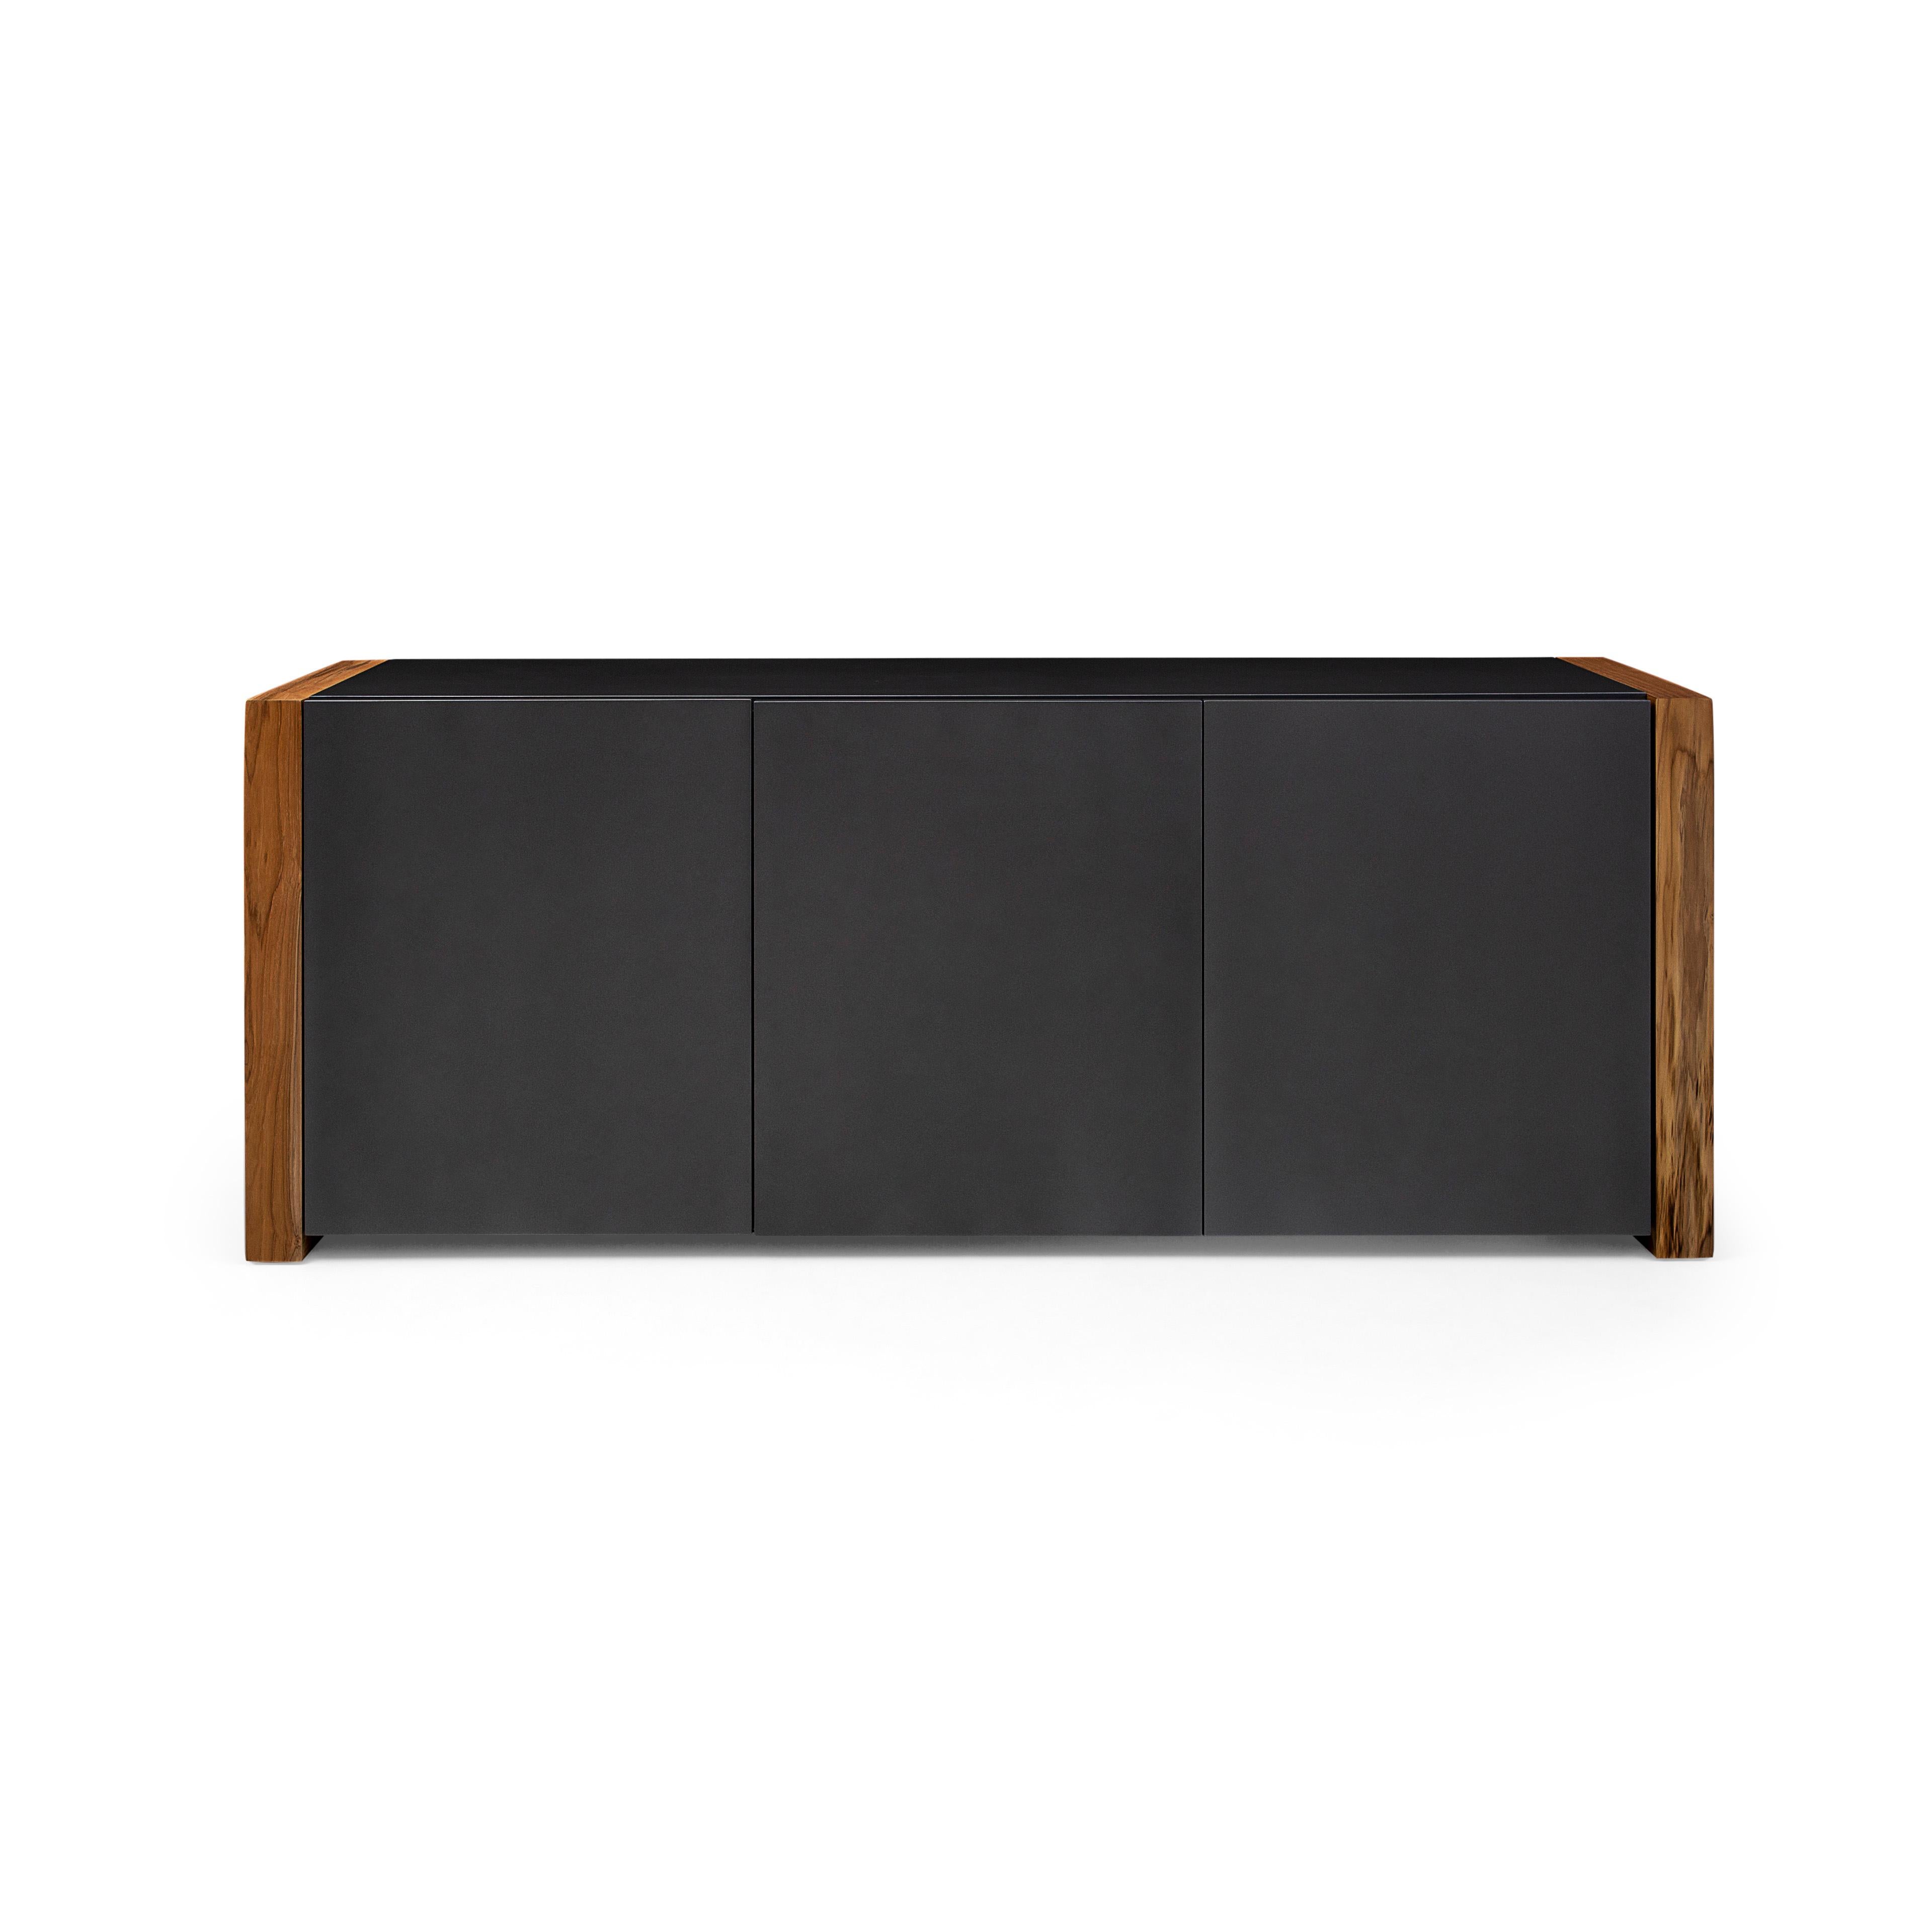 Brazilian Masp Sideboard in Graphite Finish and Teak Wood Finish End Frames For Sale